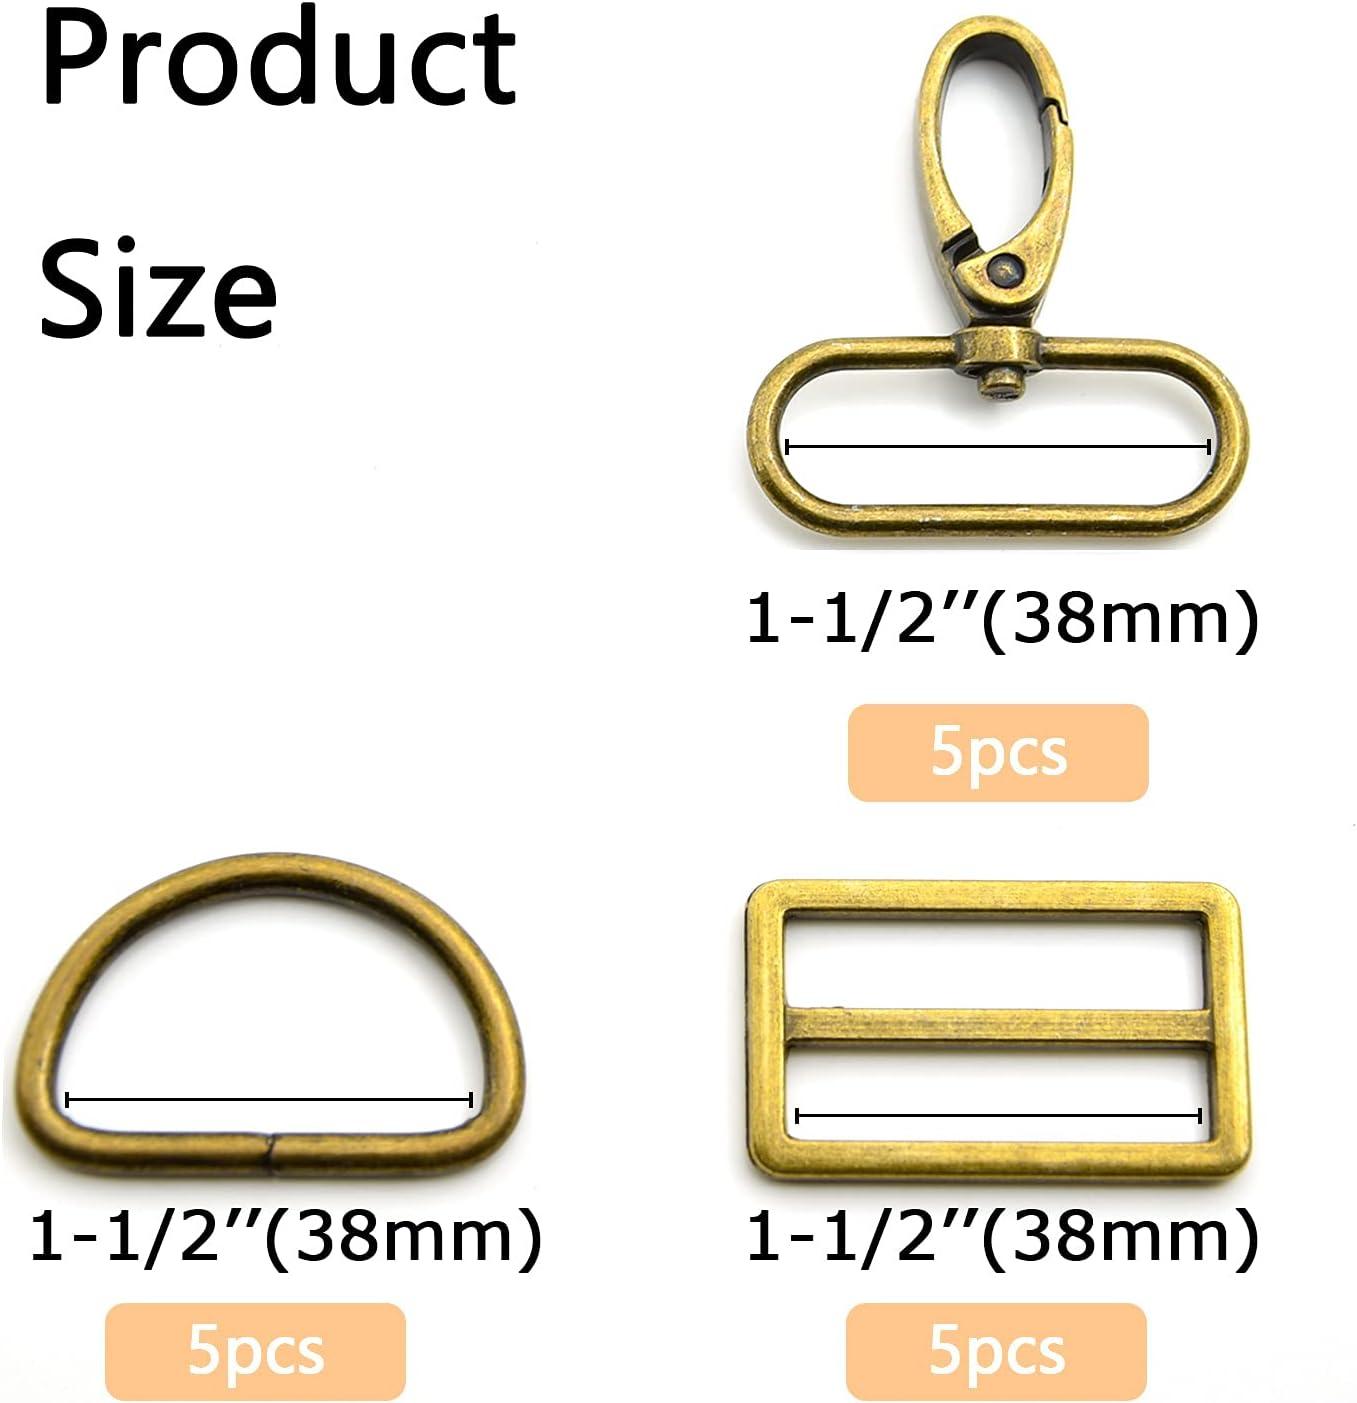 15Pcs Metal Swivel Snaps Hooks with D Rings and Tri-Glides Slide Buckles  for Key Lanyard Purse Bag Straps Dog Collars DIY Sewing Hardware Craft (1